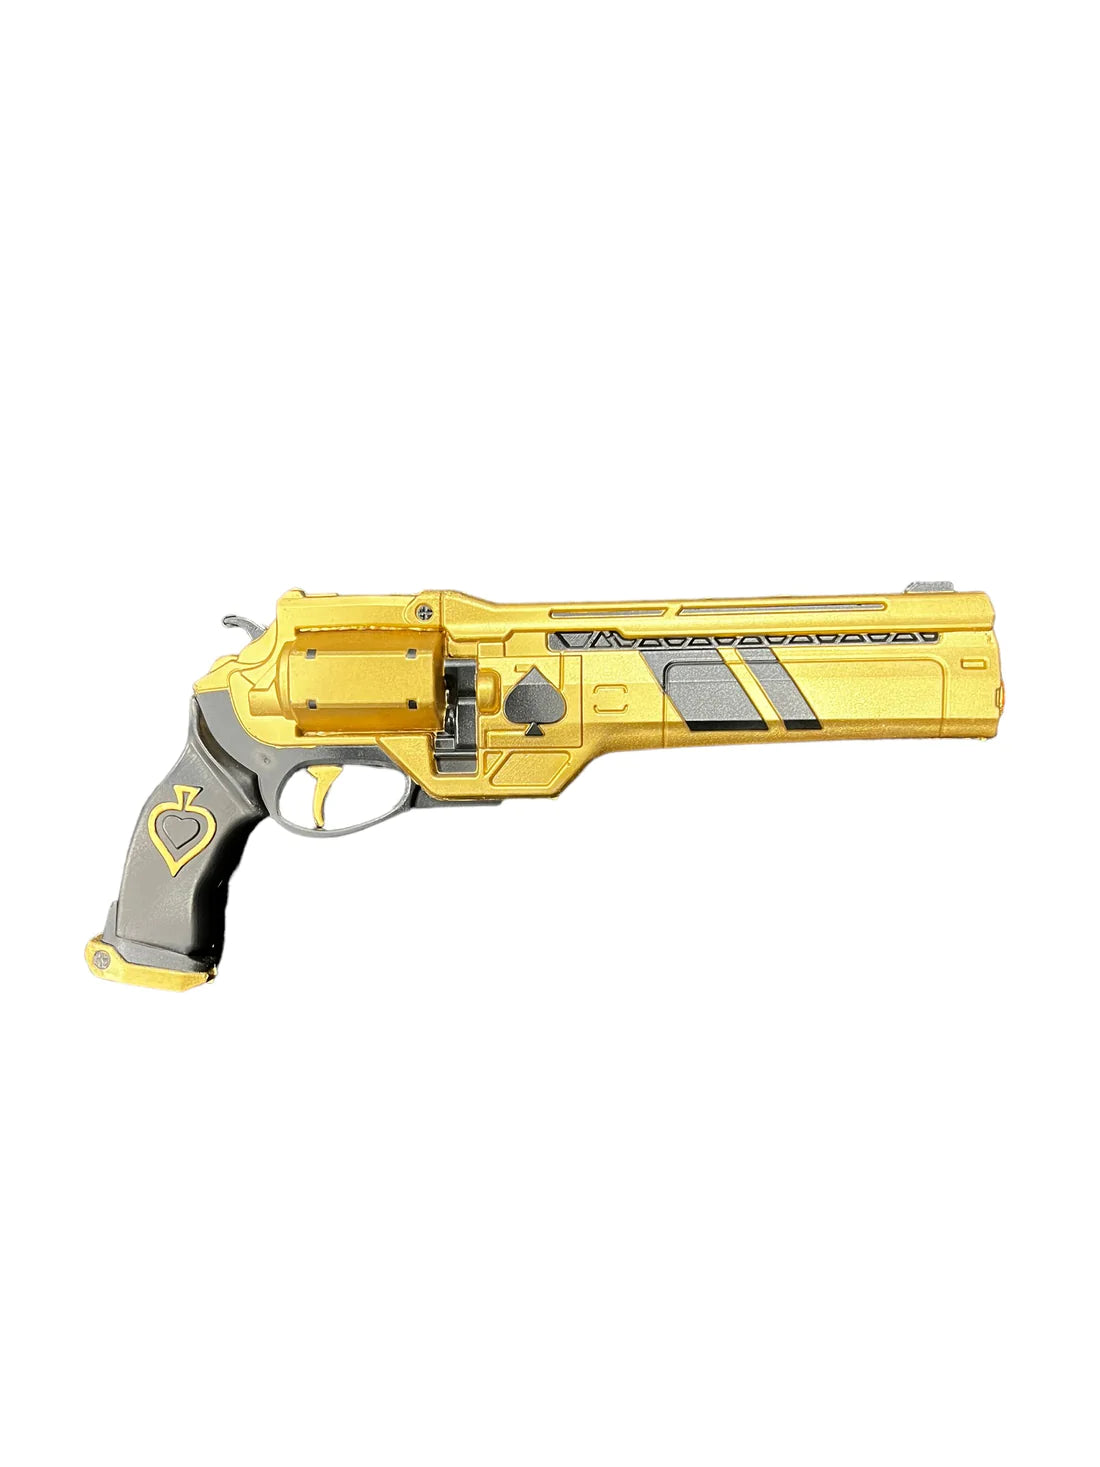 Replica Foam Gun Ace of The Spades Hand Cannon Prop Classic Ornament Free Banner Does not Shoot Gift Xmas Game Anime